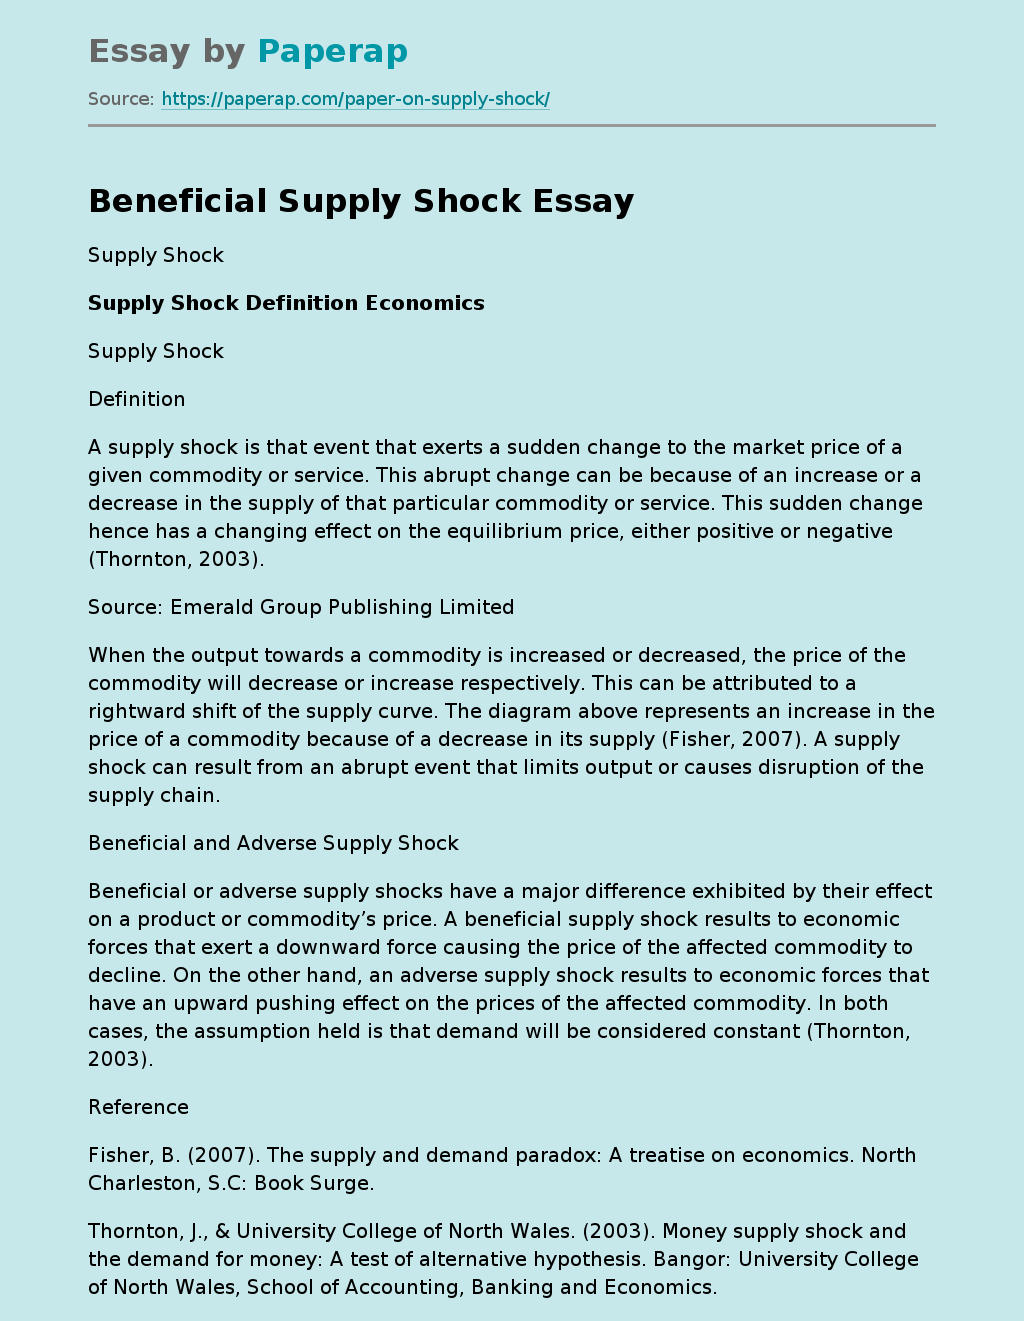 Beneficial Supply Shock